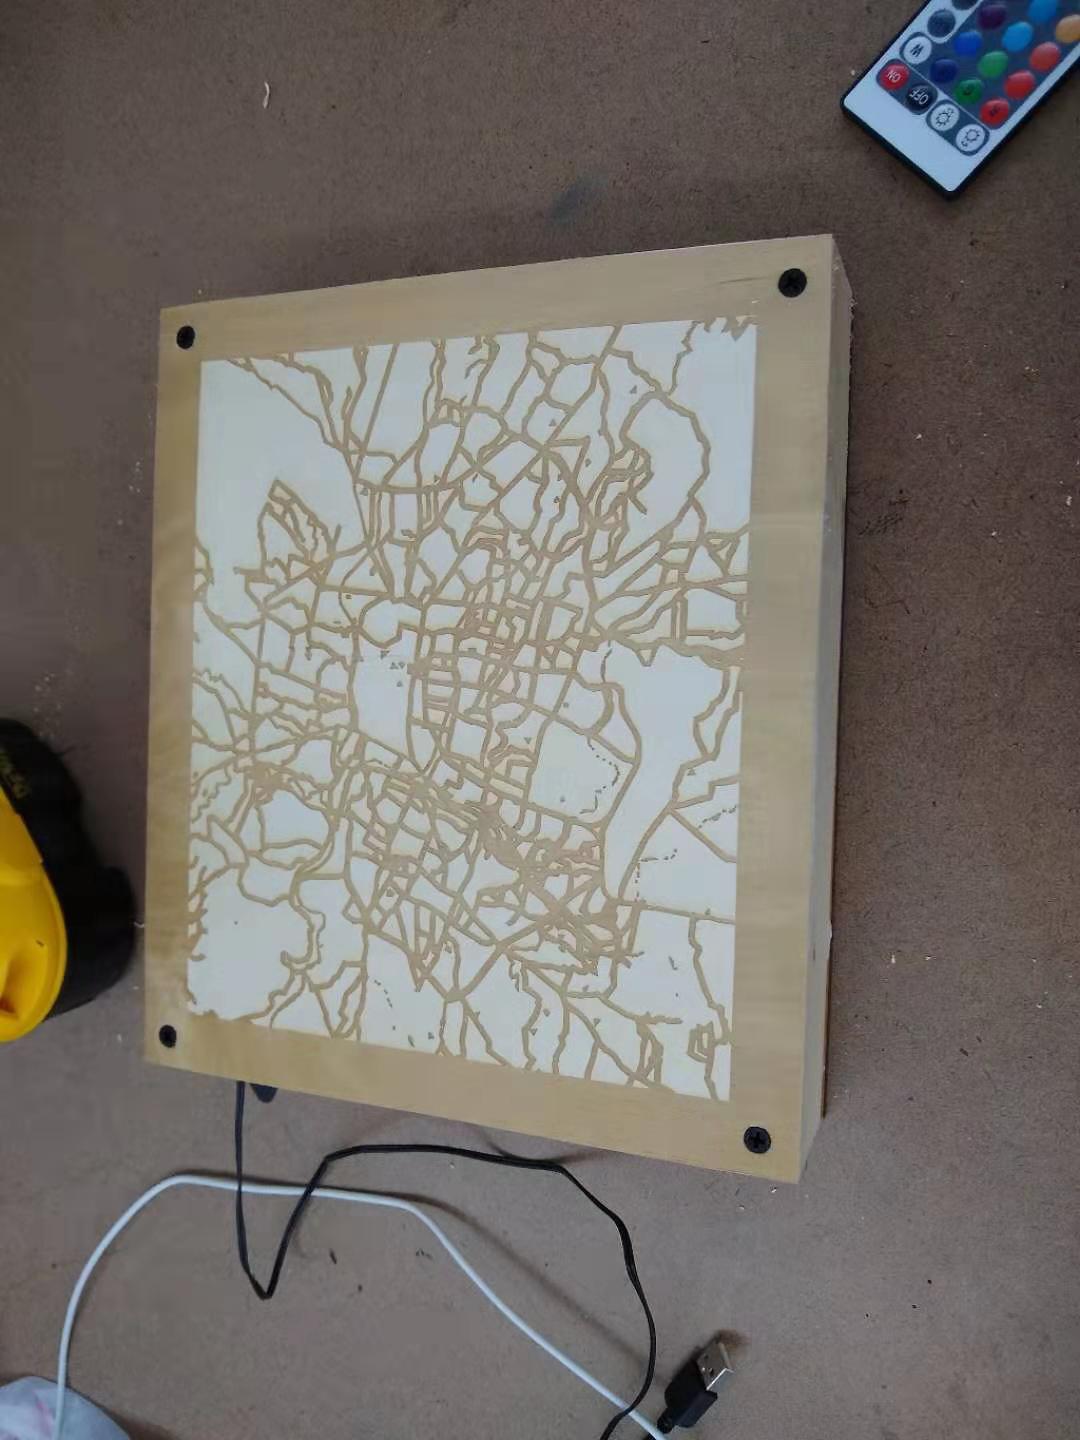 A box with an engraved city map screwed on the back.